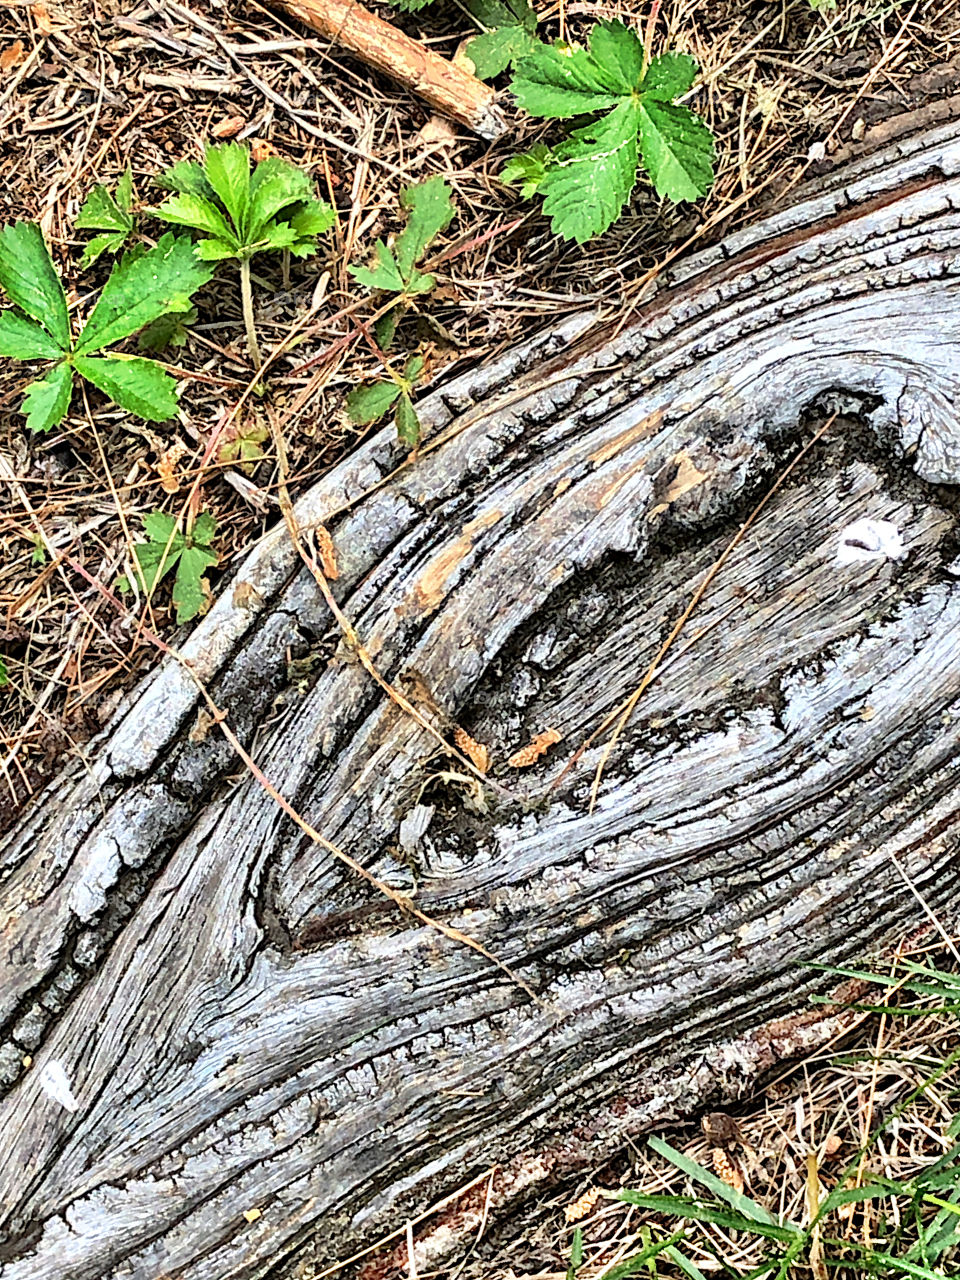 Tree stump and flora in a wooded landscape in Massachusetts, with textured elliptical grooves or rings around the wooden surface 